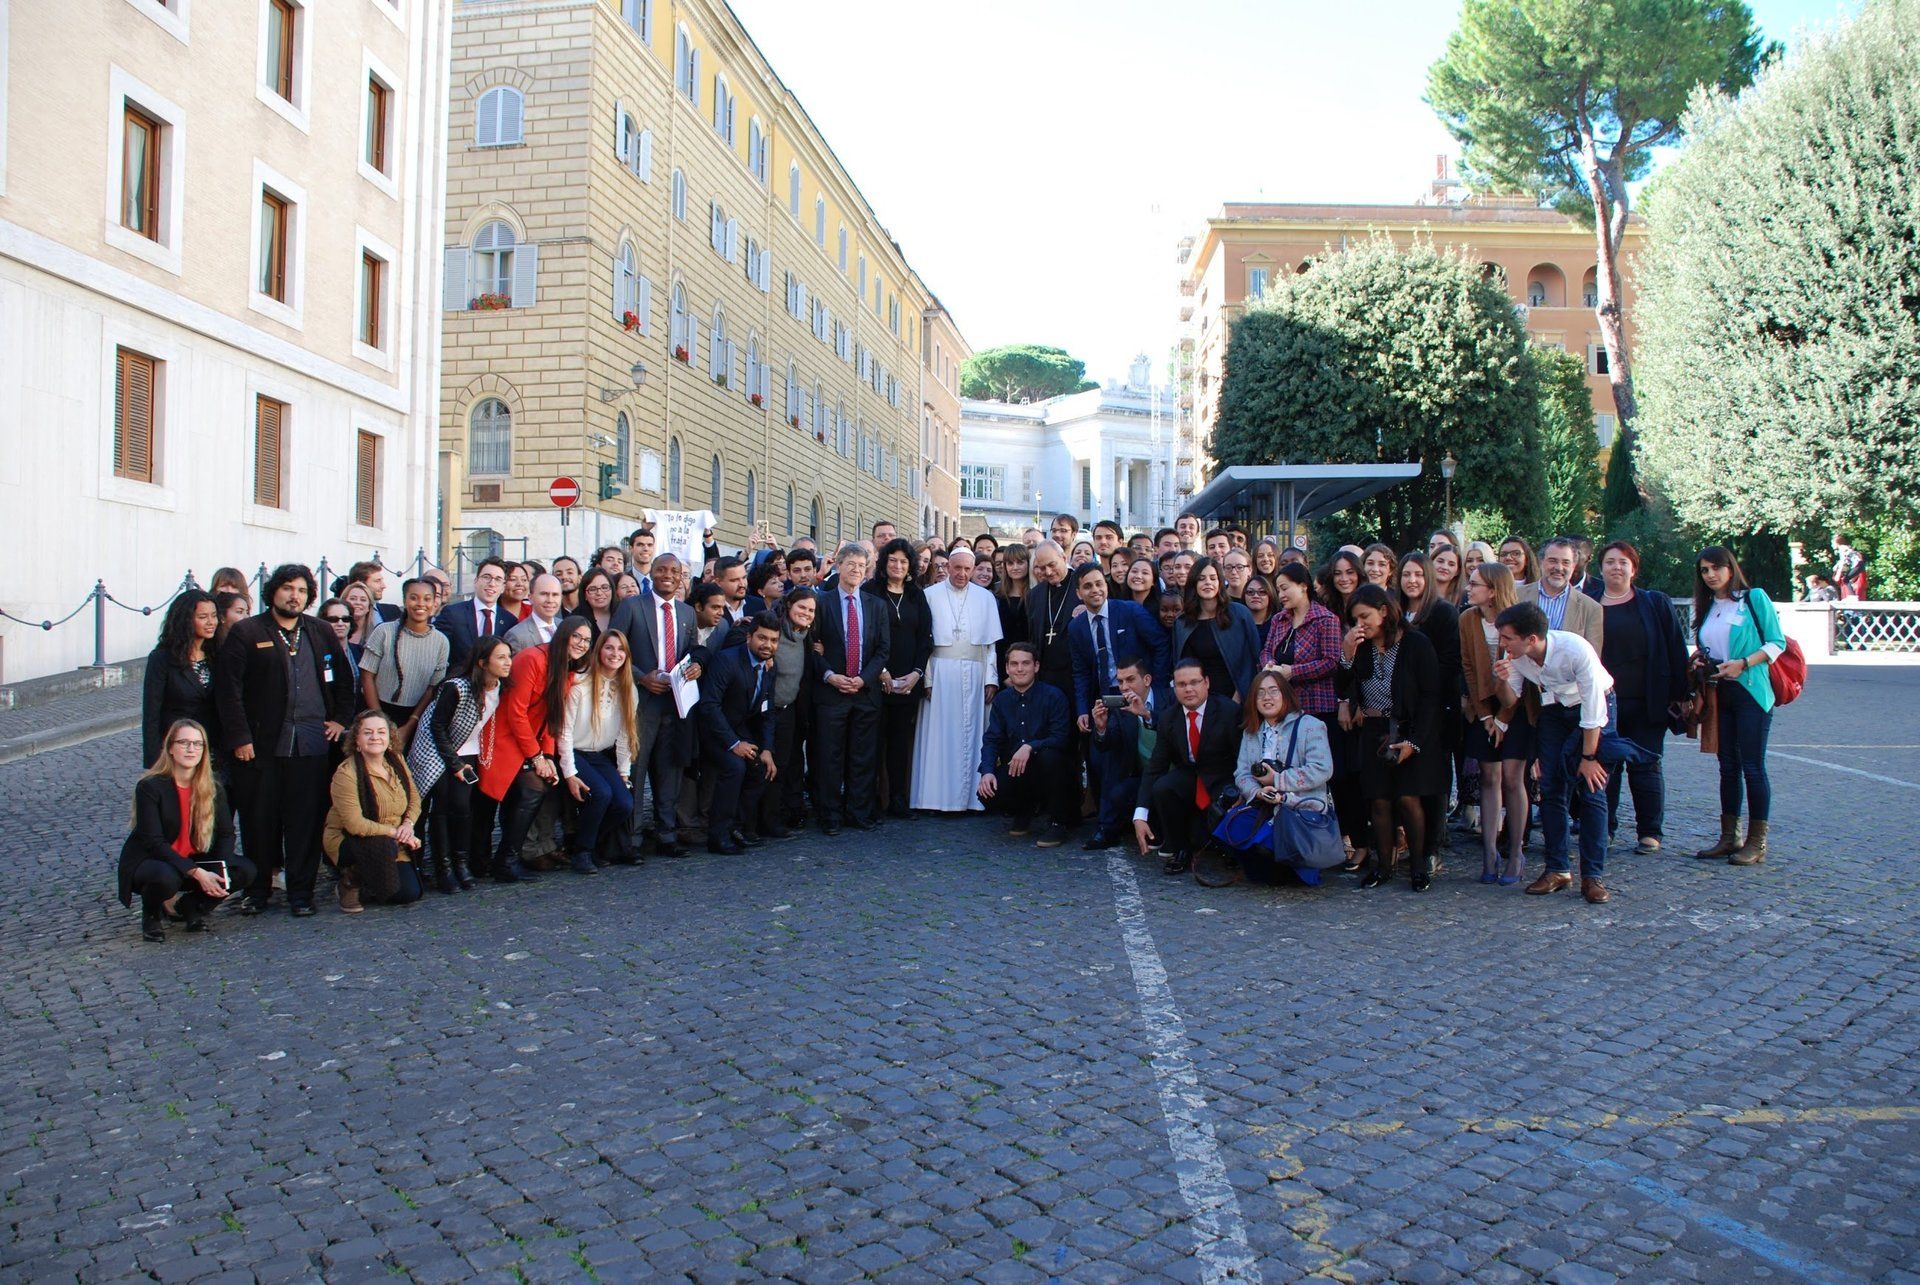 represented by founder Jennifer Gross, participated in the Vatican Youth Symposium 